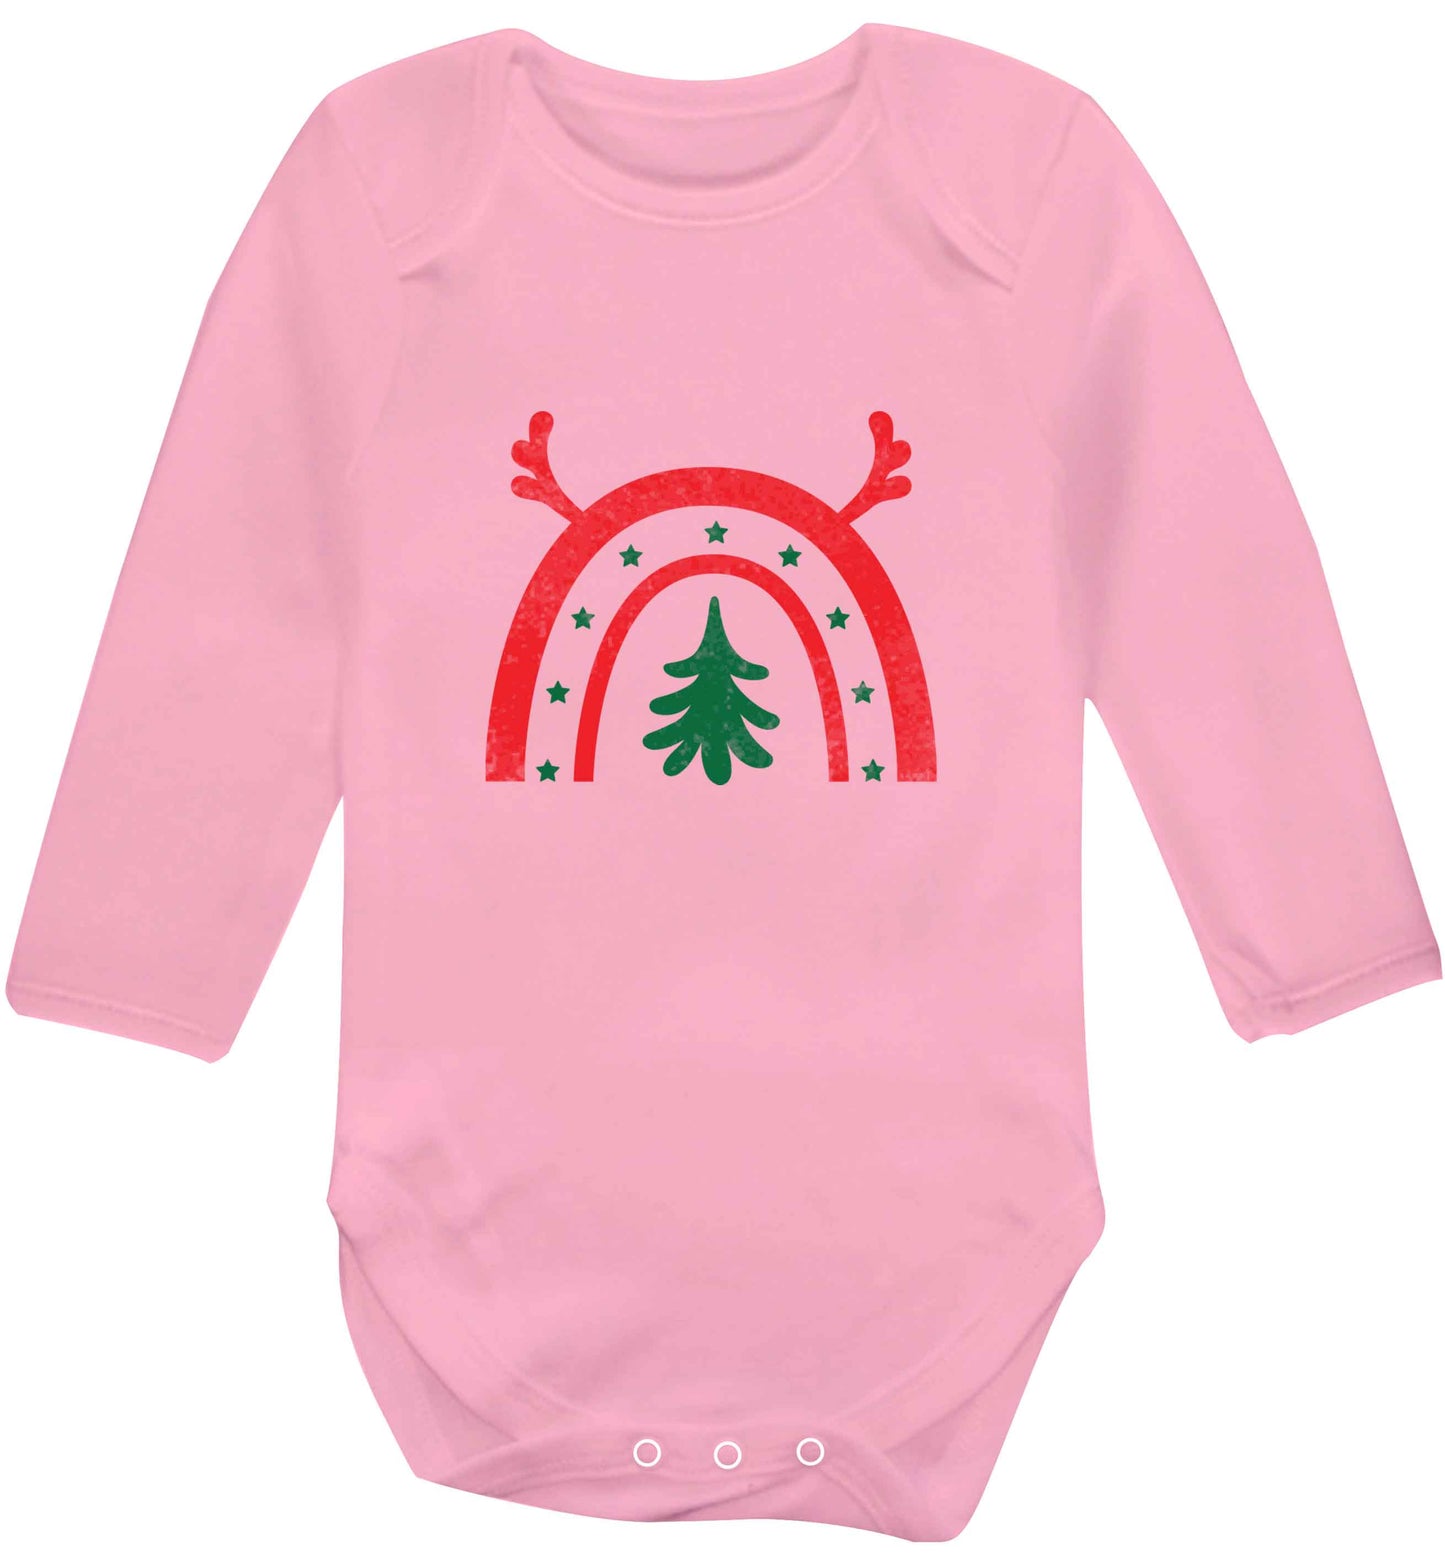 Christmas rainbow baby vest long sleeved pale pink 6-12 months